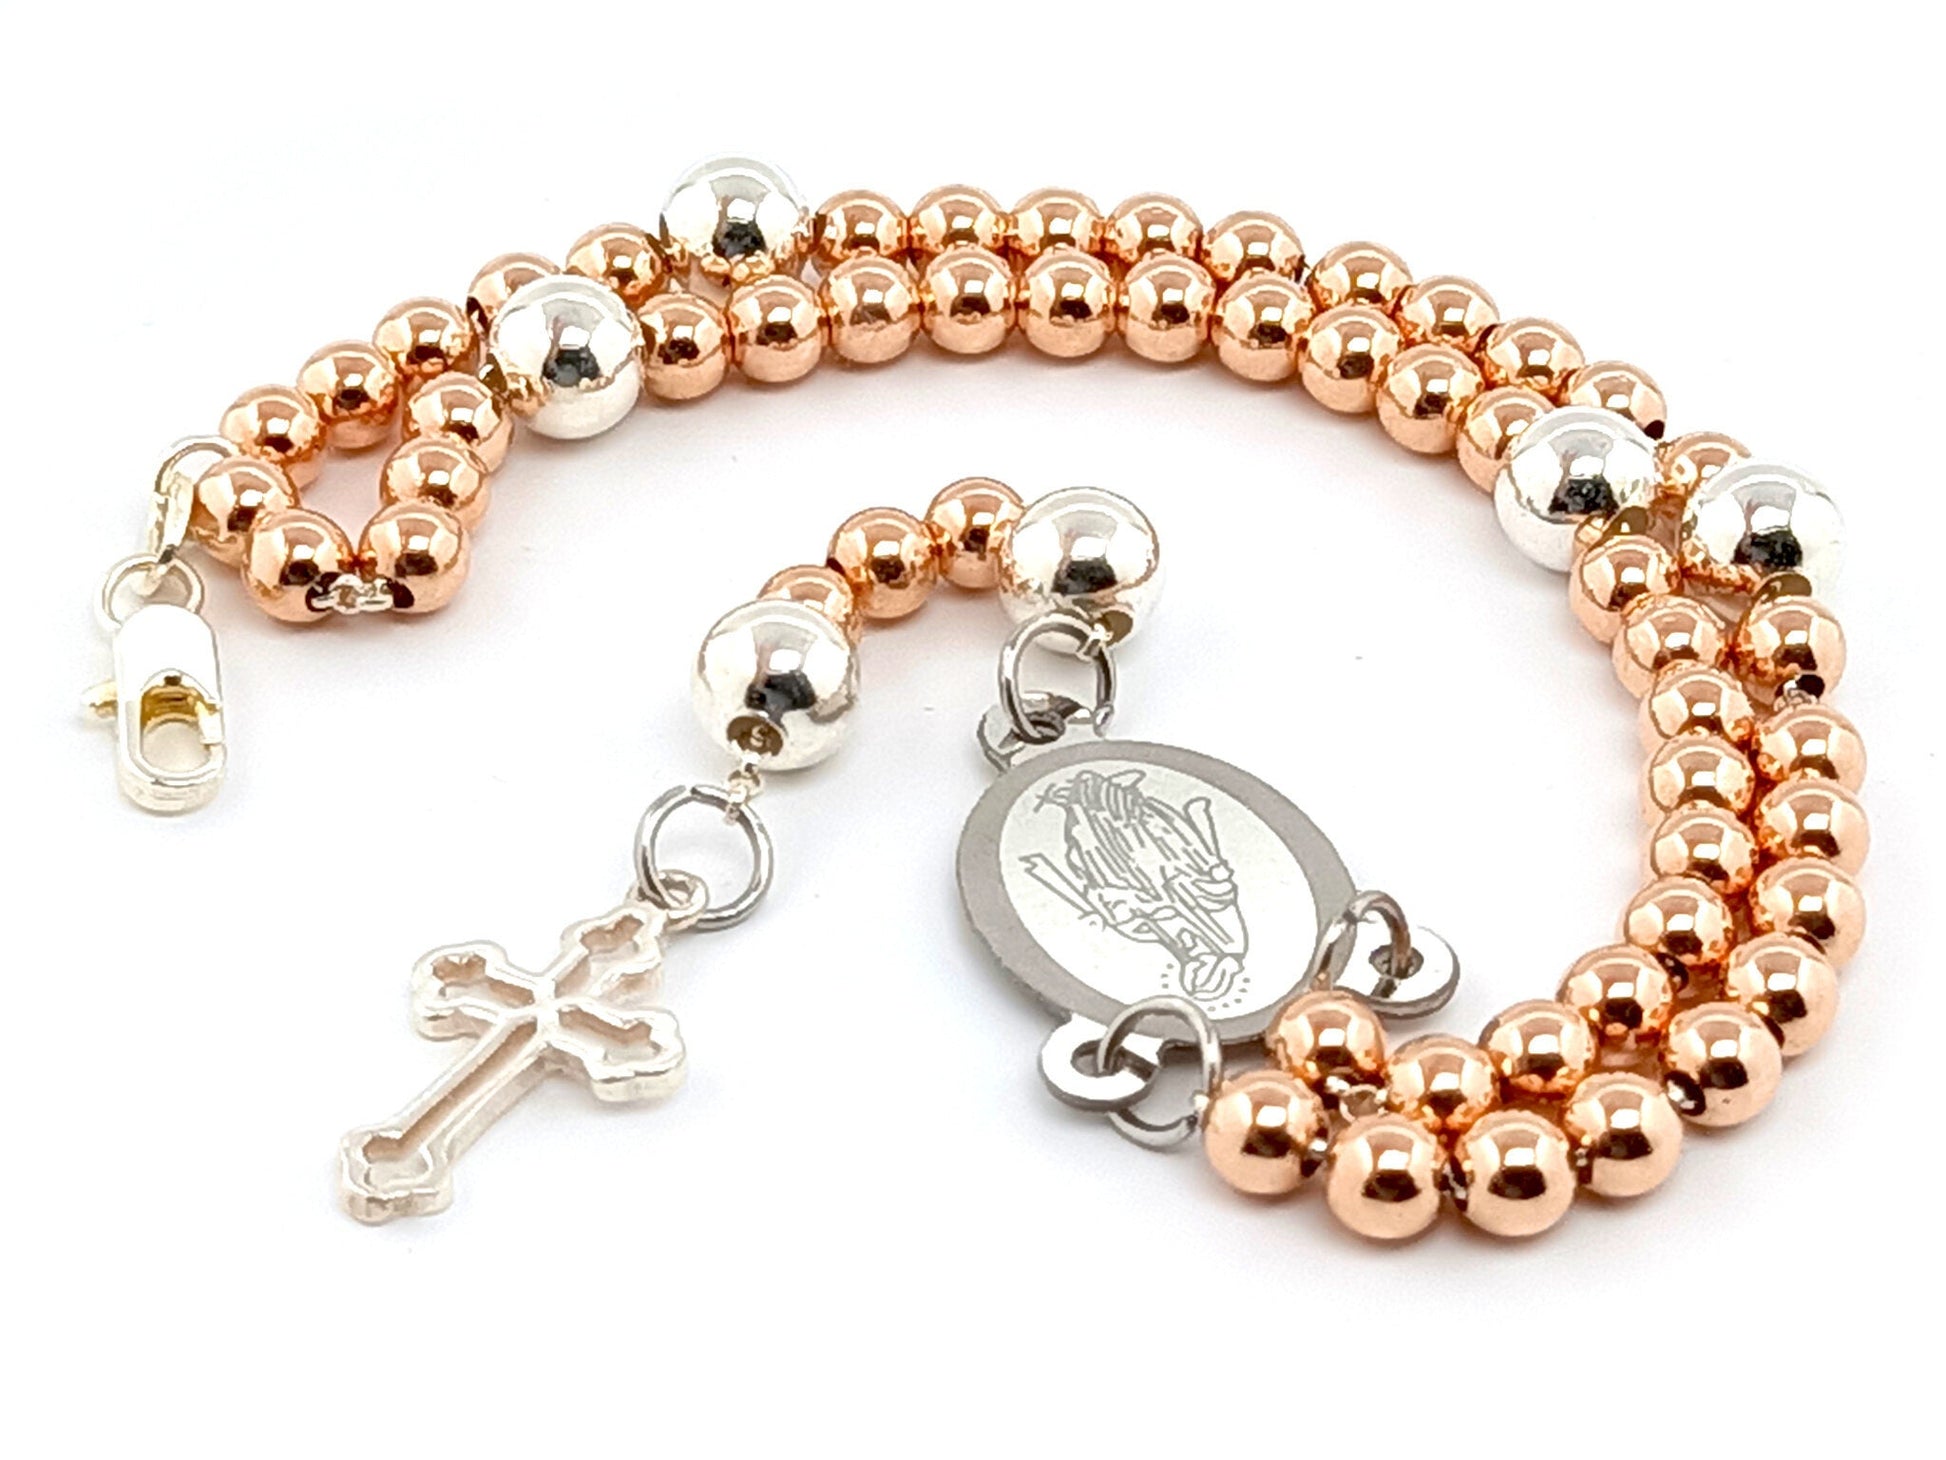 Sterling silver rose gold unique rosary beads rosary bracelet with Miraculous medal centre and 925 sterling silver linking cross.